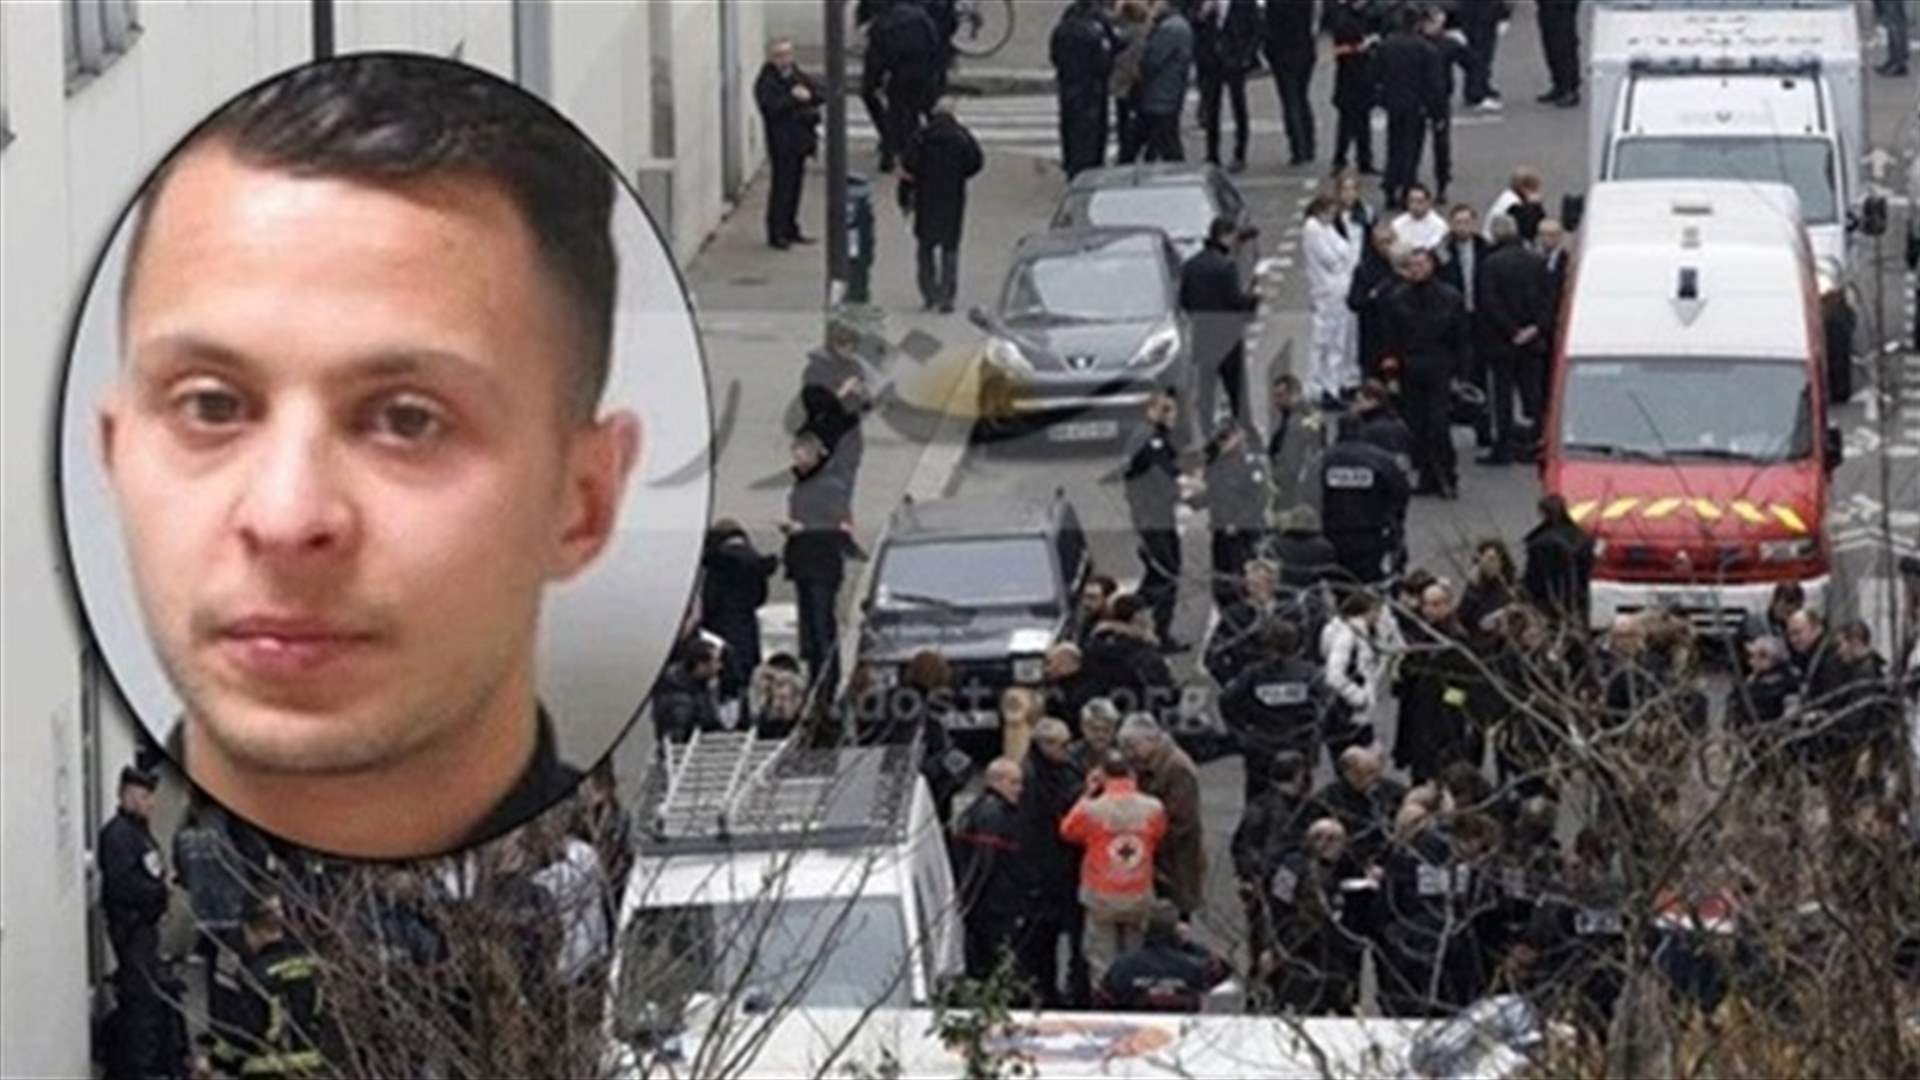 Salah Abdeslam refused to blow himself up, brother says - BFM TV